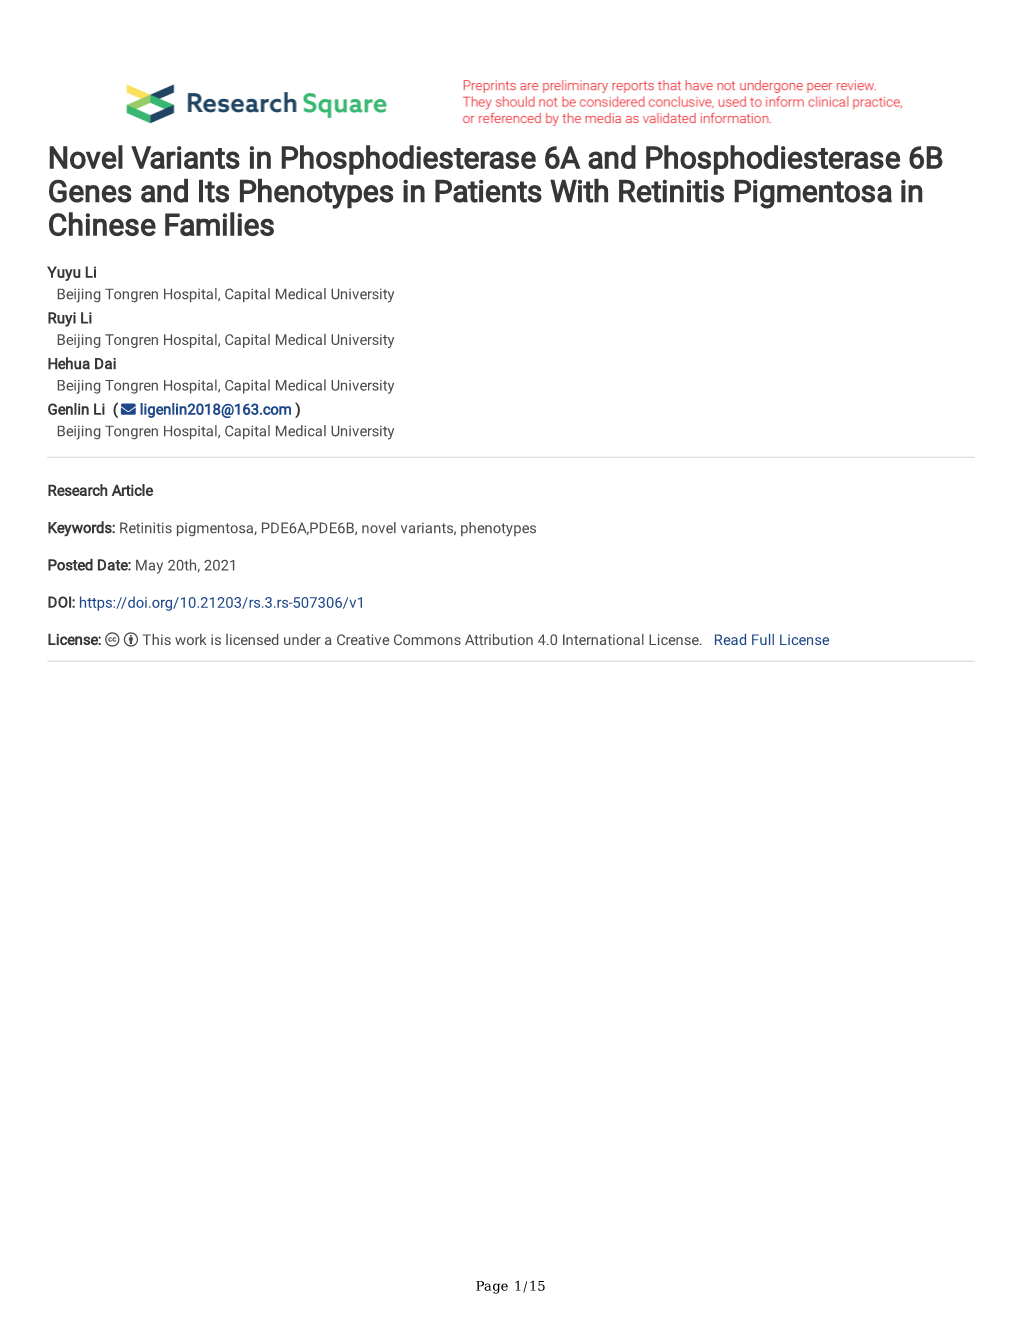 Novel Variants in Phosphodiesterase 6A and Phosphodiesterase 6B Genes and Its Phenotypes in Patients with Retinitis Pigmentosa in Chinese Families